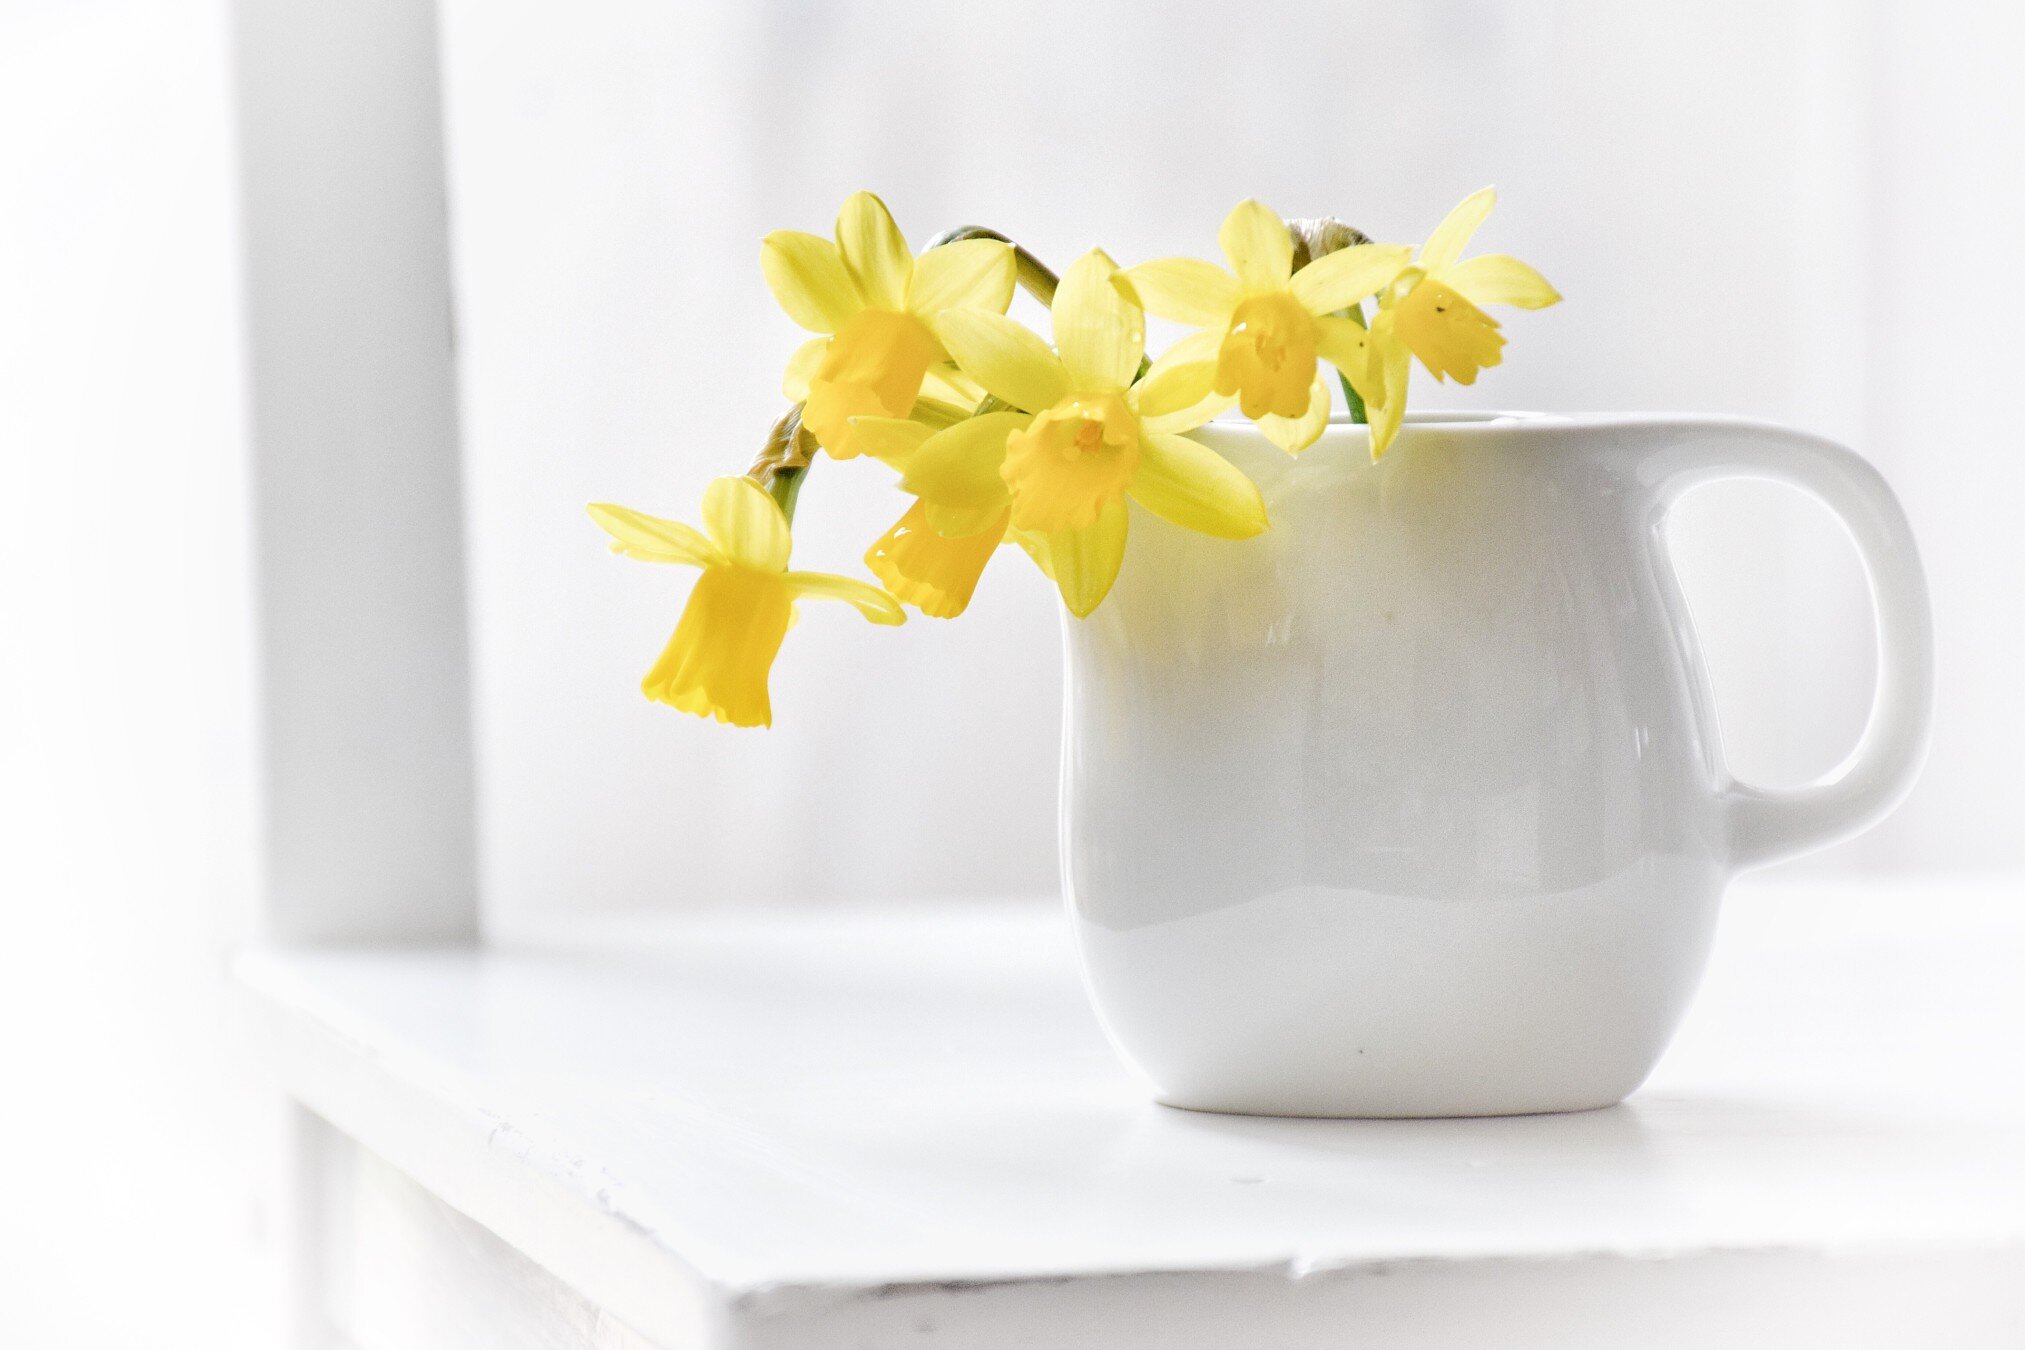 yellow-daffodils-in-white-jug-simple-pop-of-color-minimal-simplicity-nominated_t20_yRpaAO.jpg